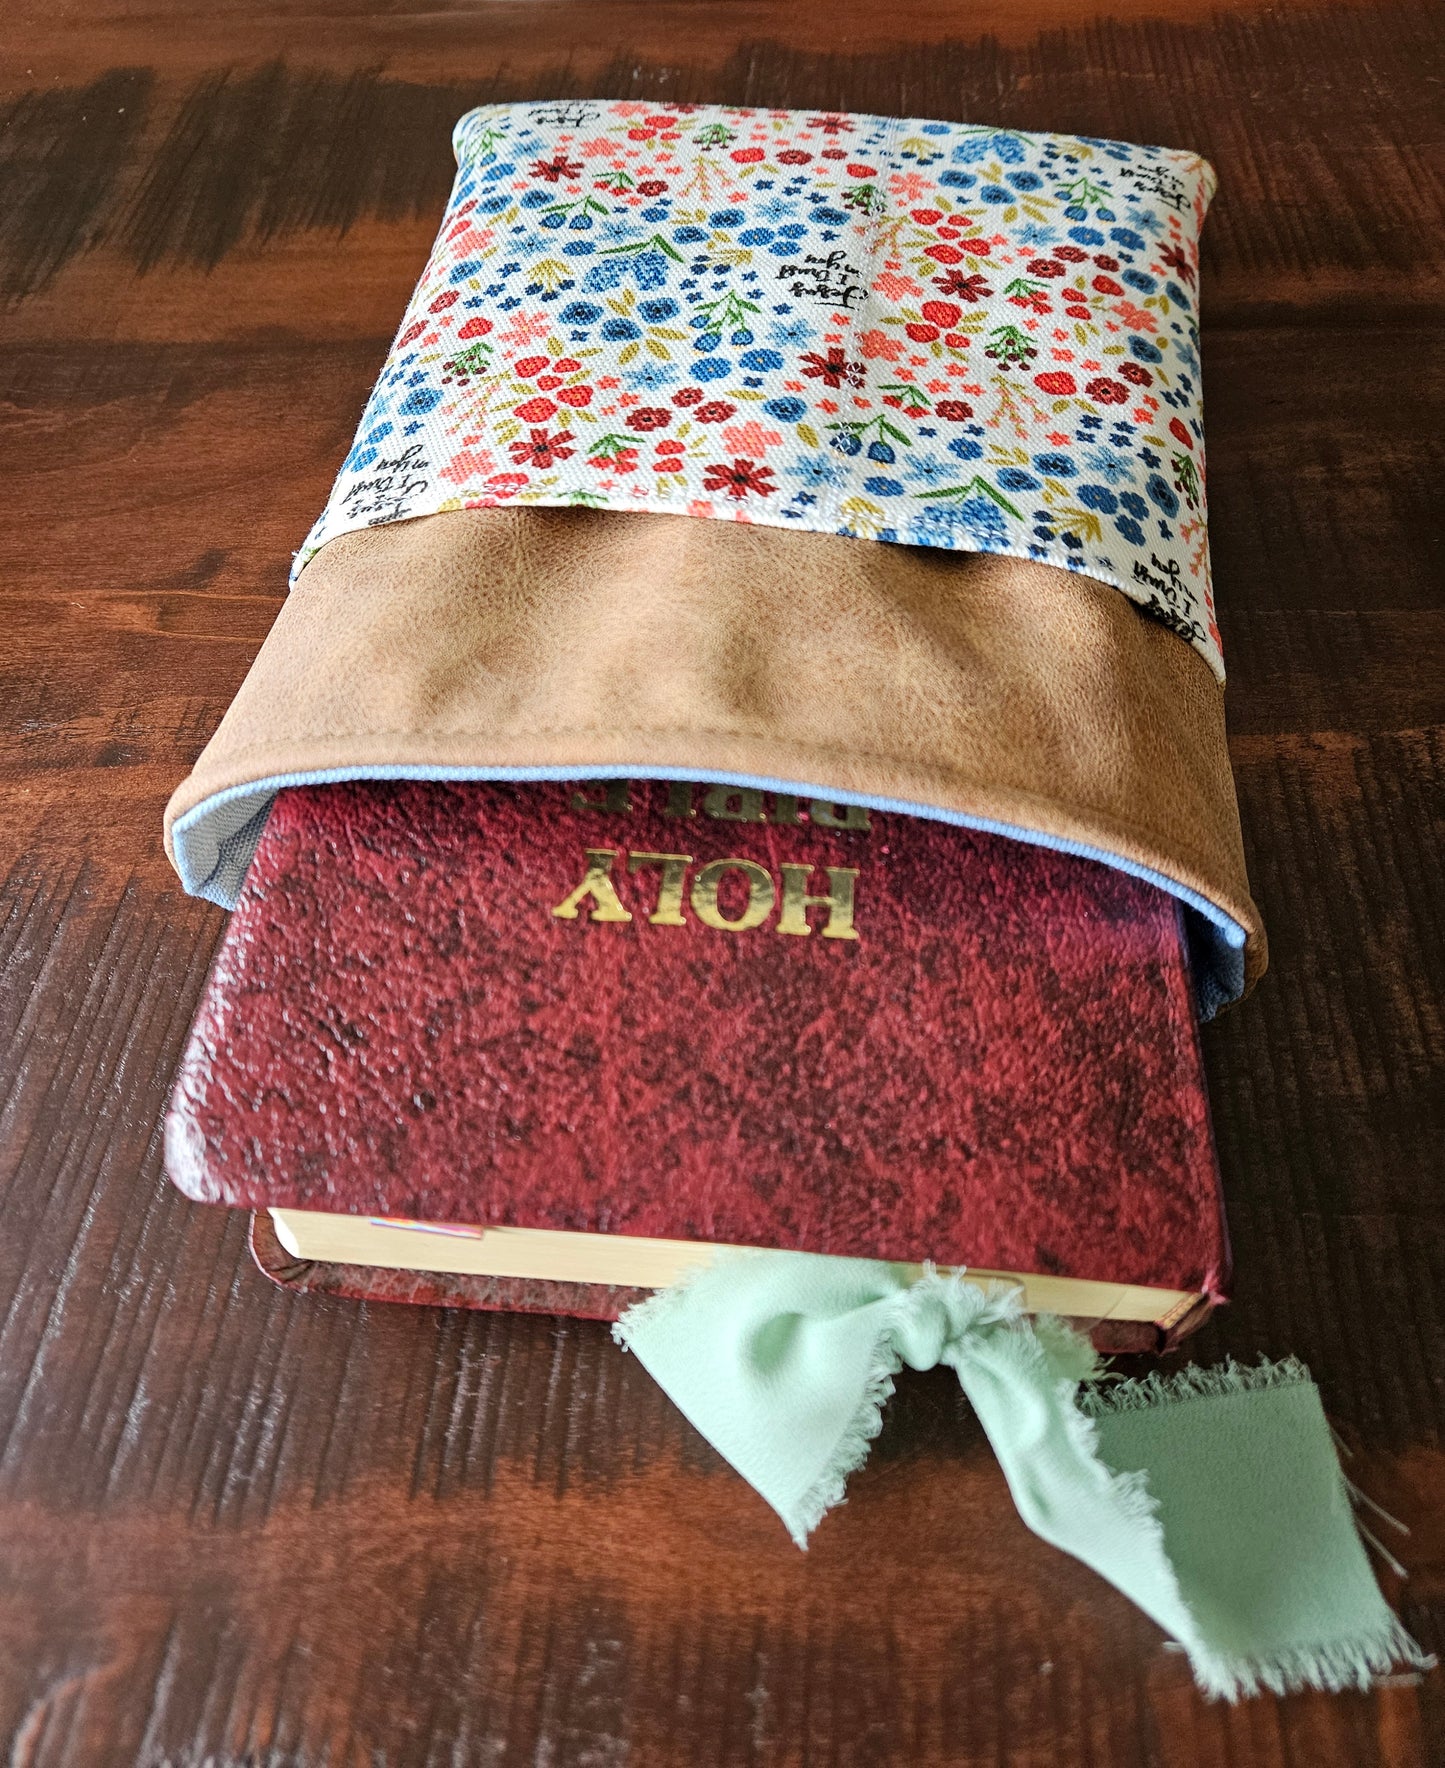 Book Sleeve Mother Teresa Do Small Things with Great Love  Catholic fabric for Journal Bibles Planners